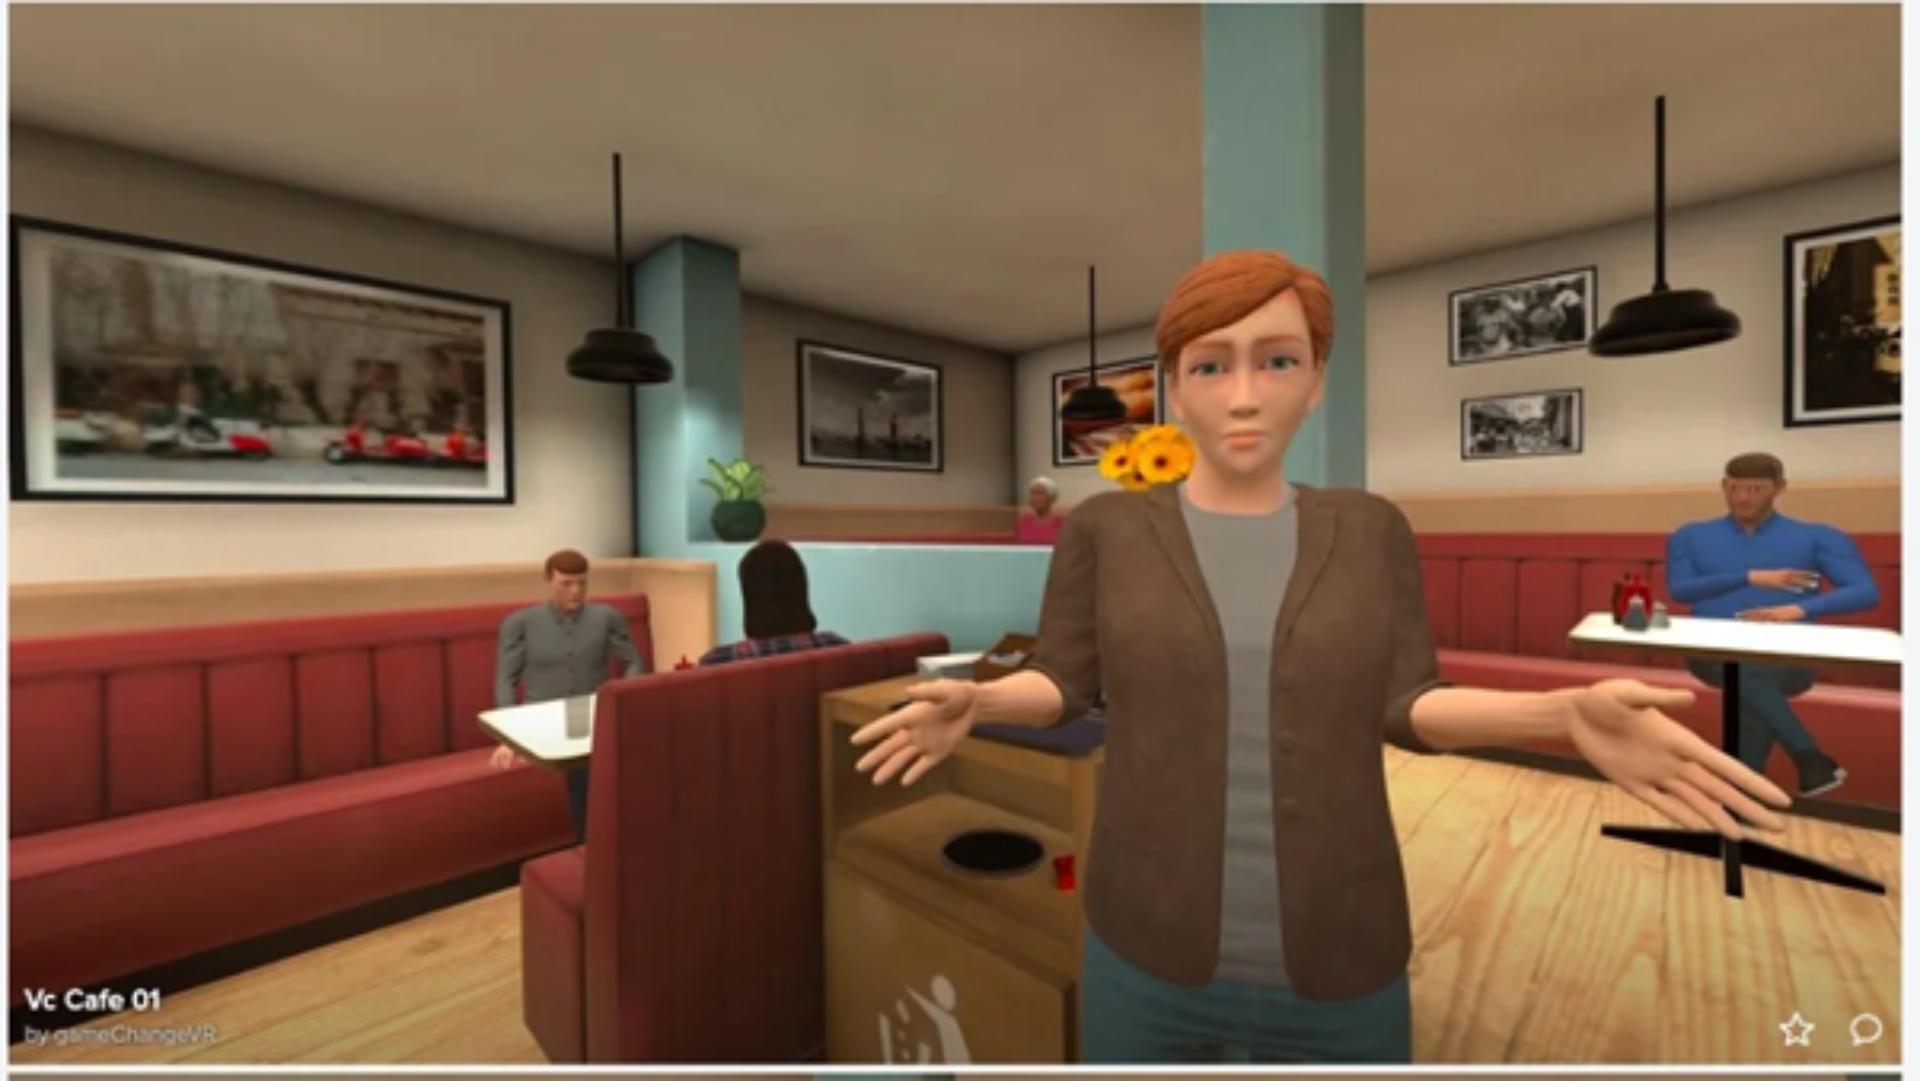 A virtual reality scene in a cafe with a person standing looking at the camera